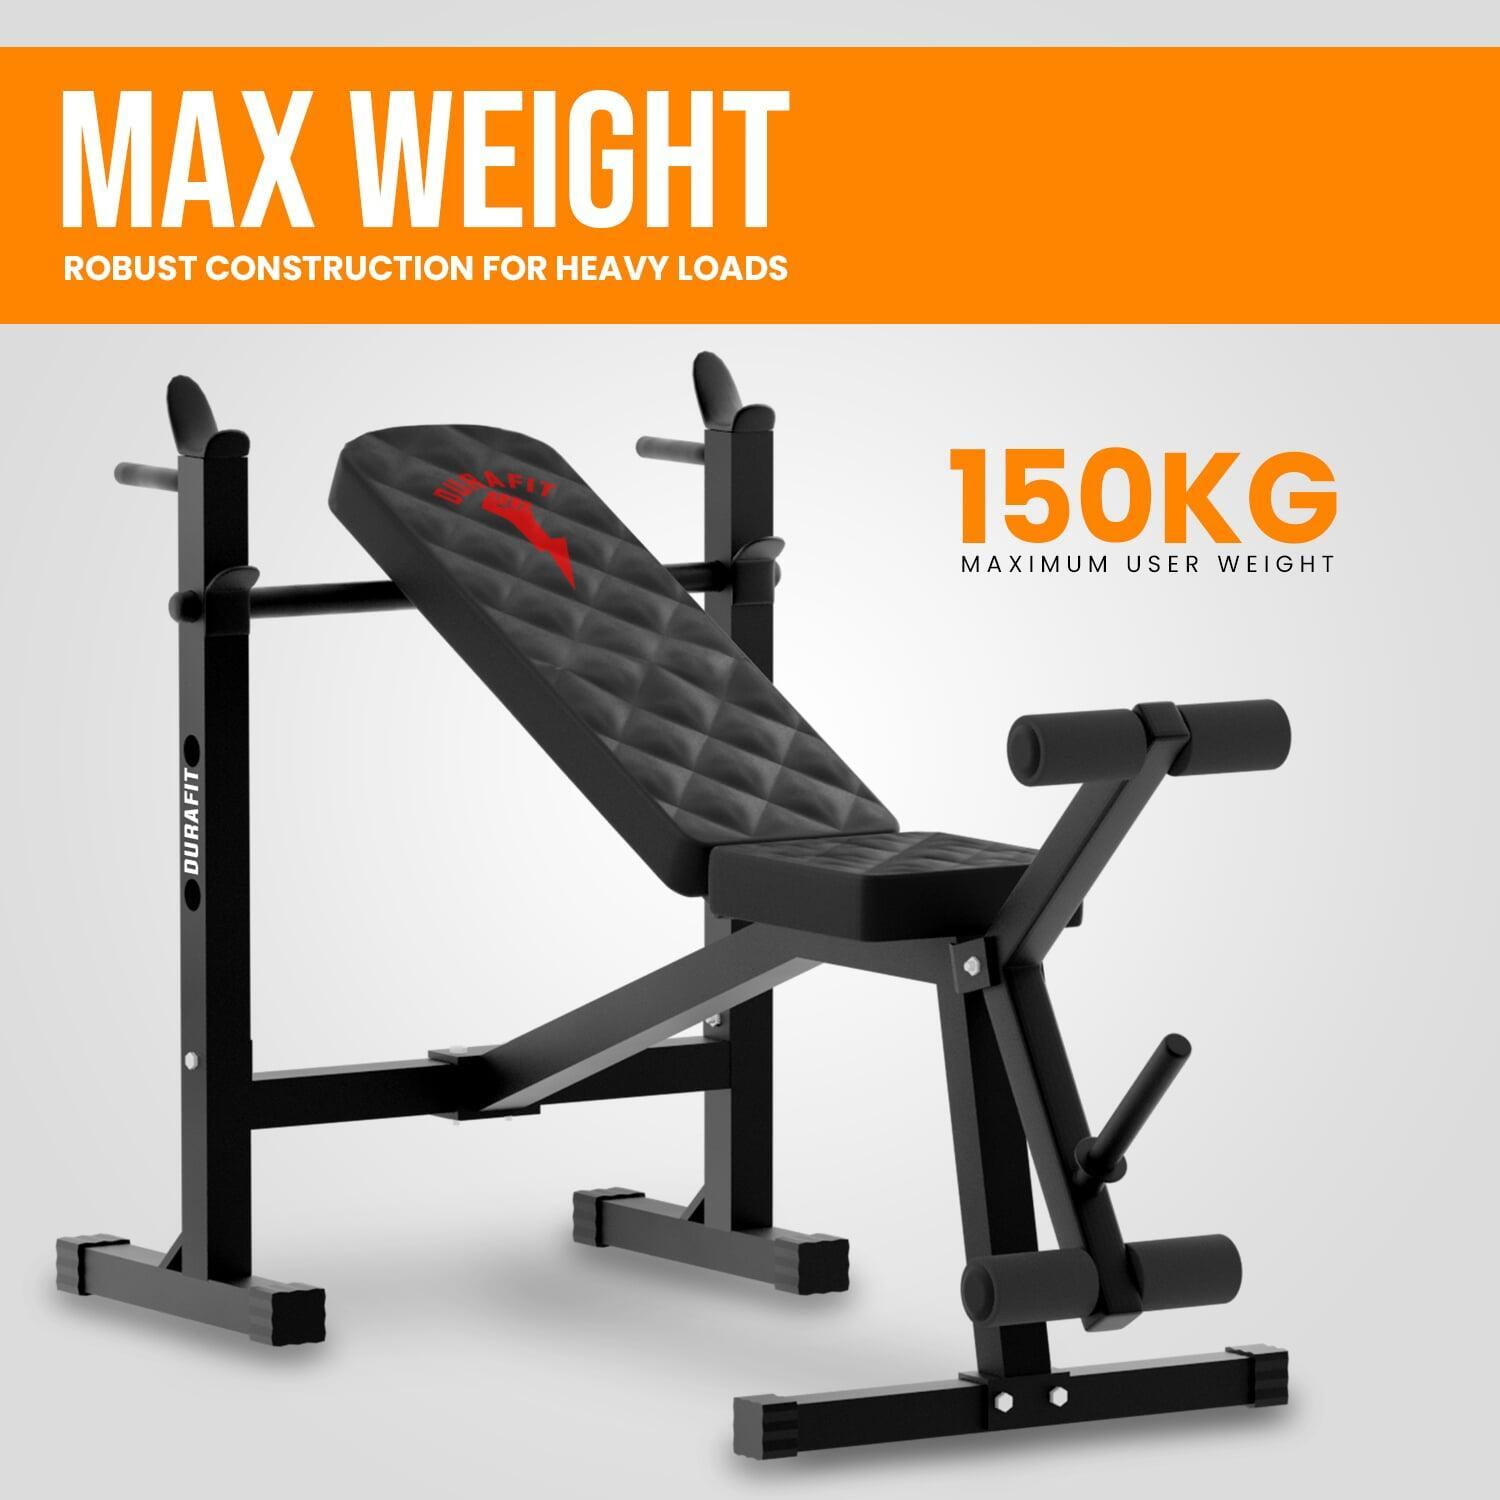 Durafit Multifunction Bench OMFB1 with Max user weight 150kg